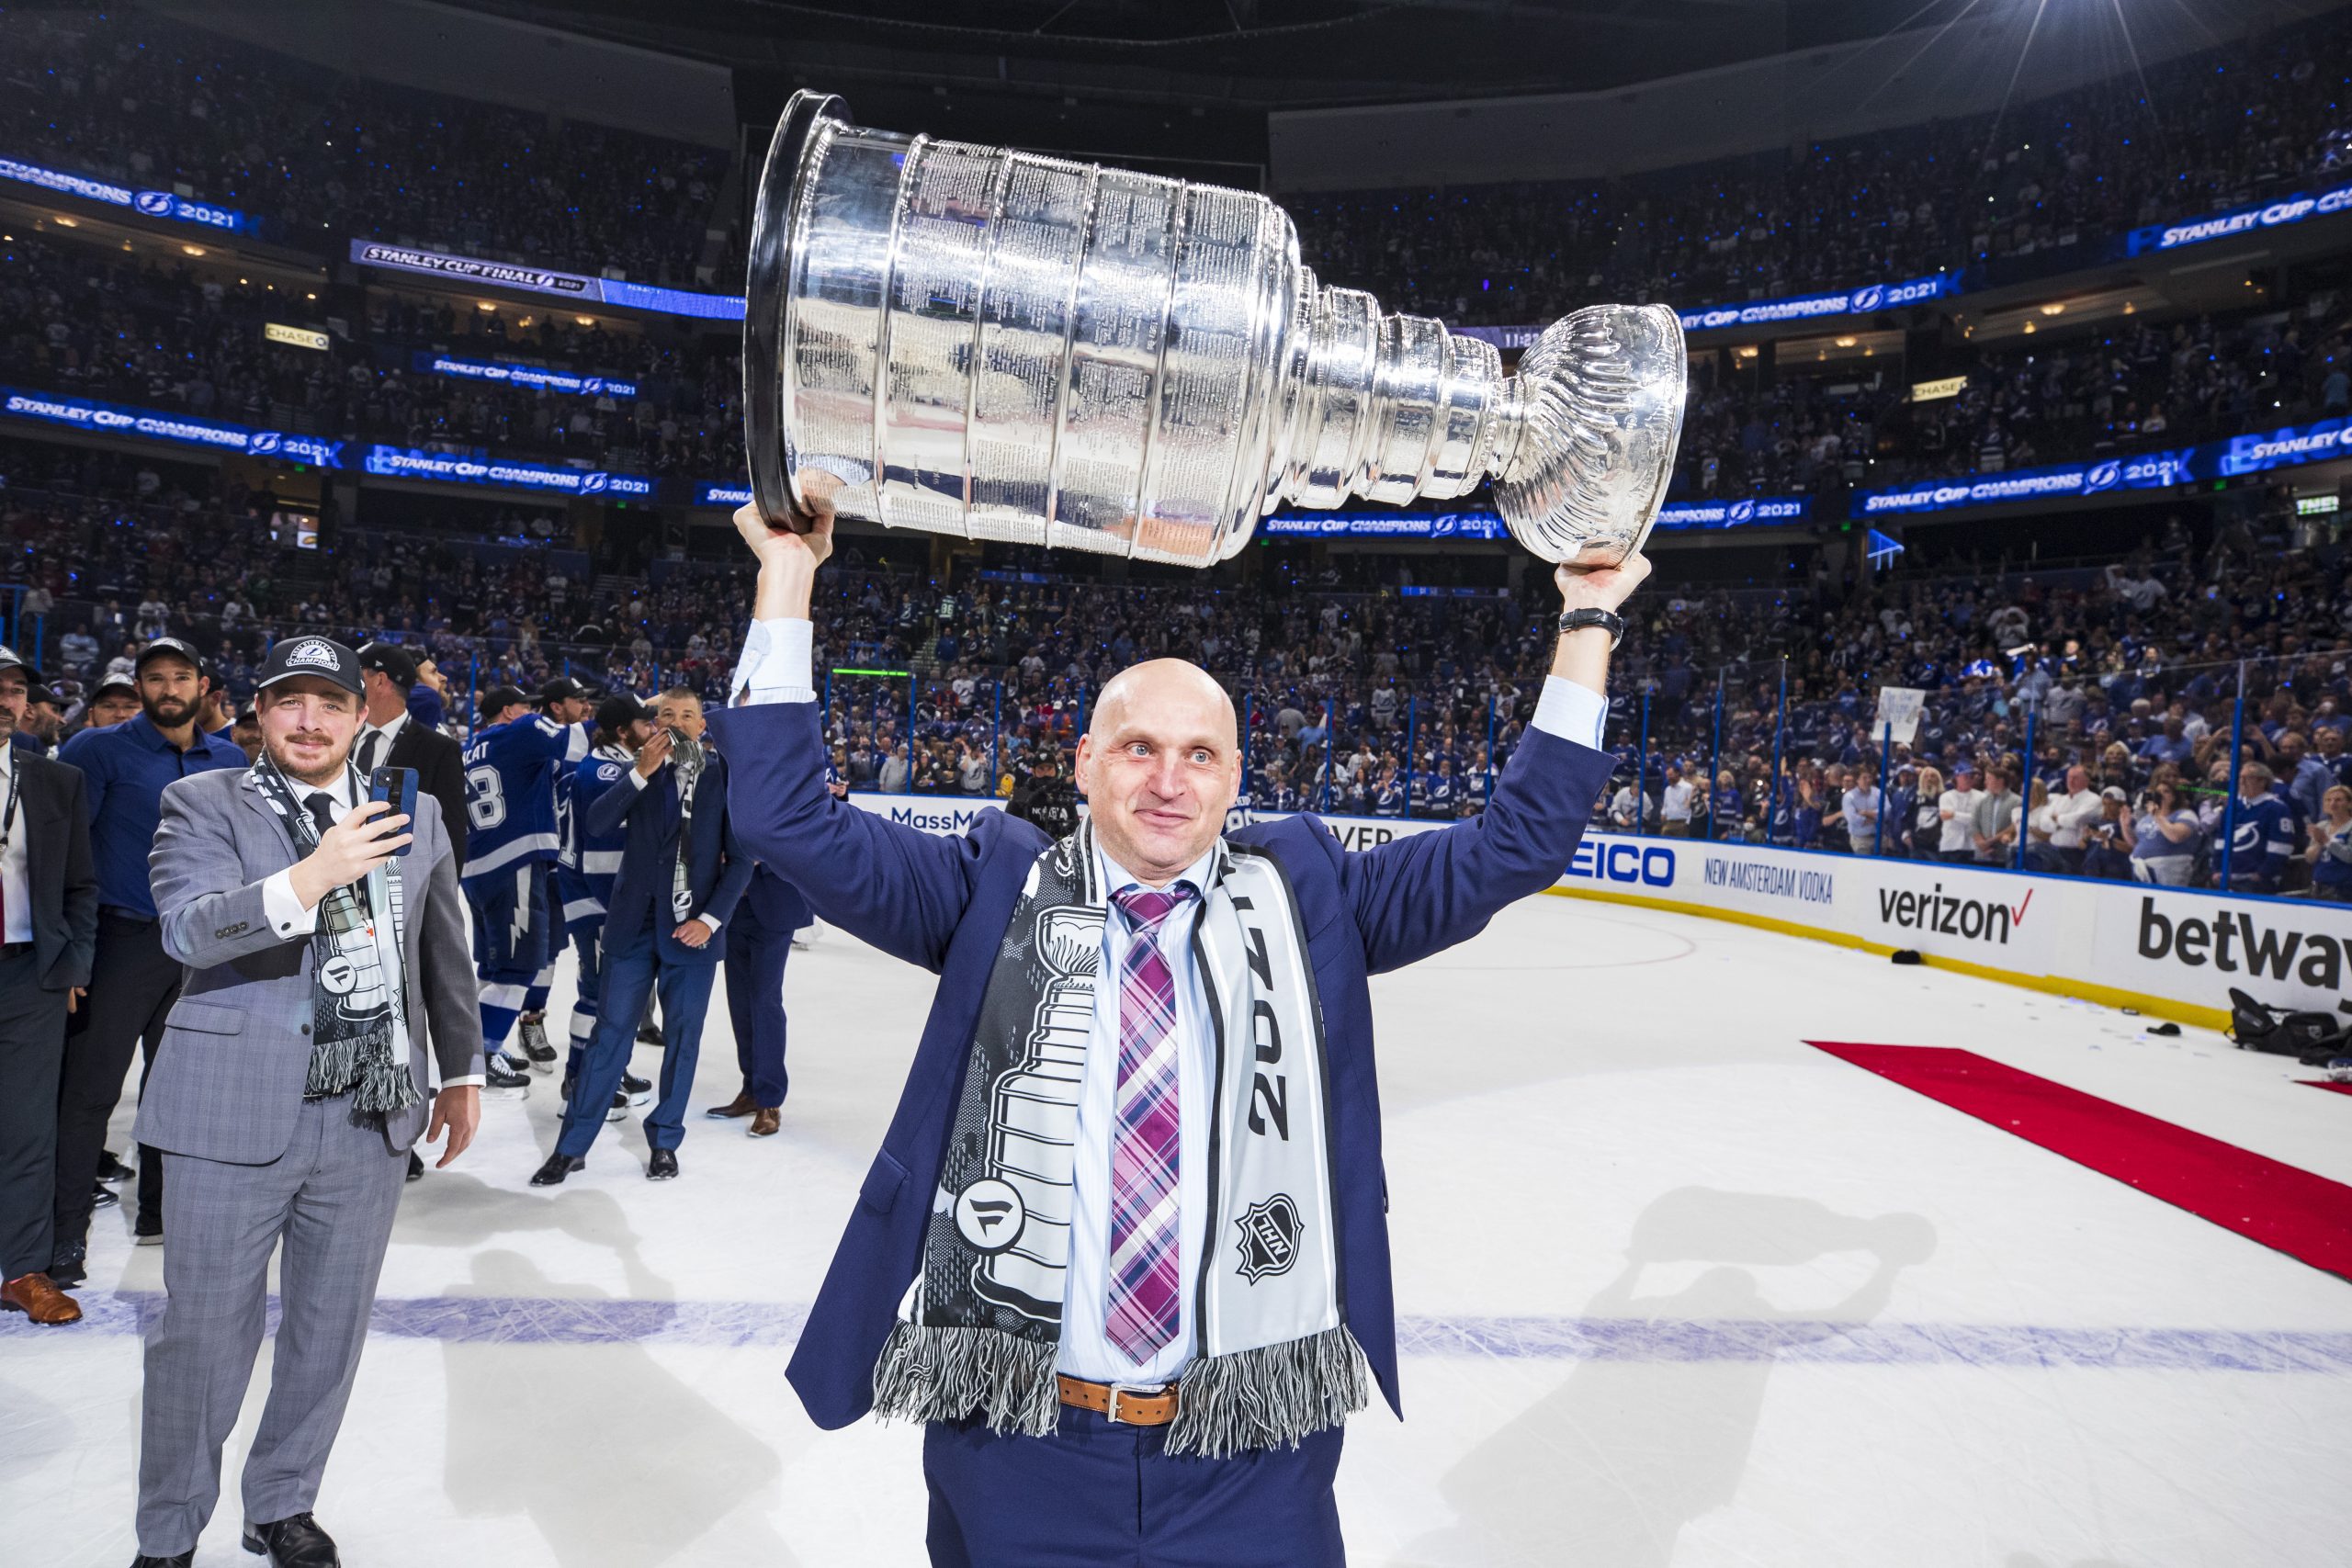 Steve Yzerman 'thrilled' for Tampa Bay's Stanley Cup success